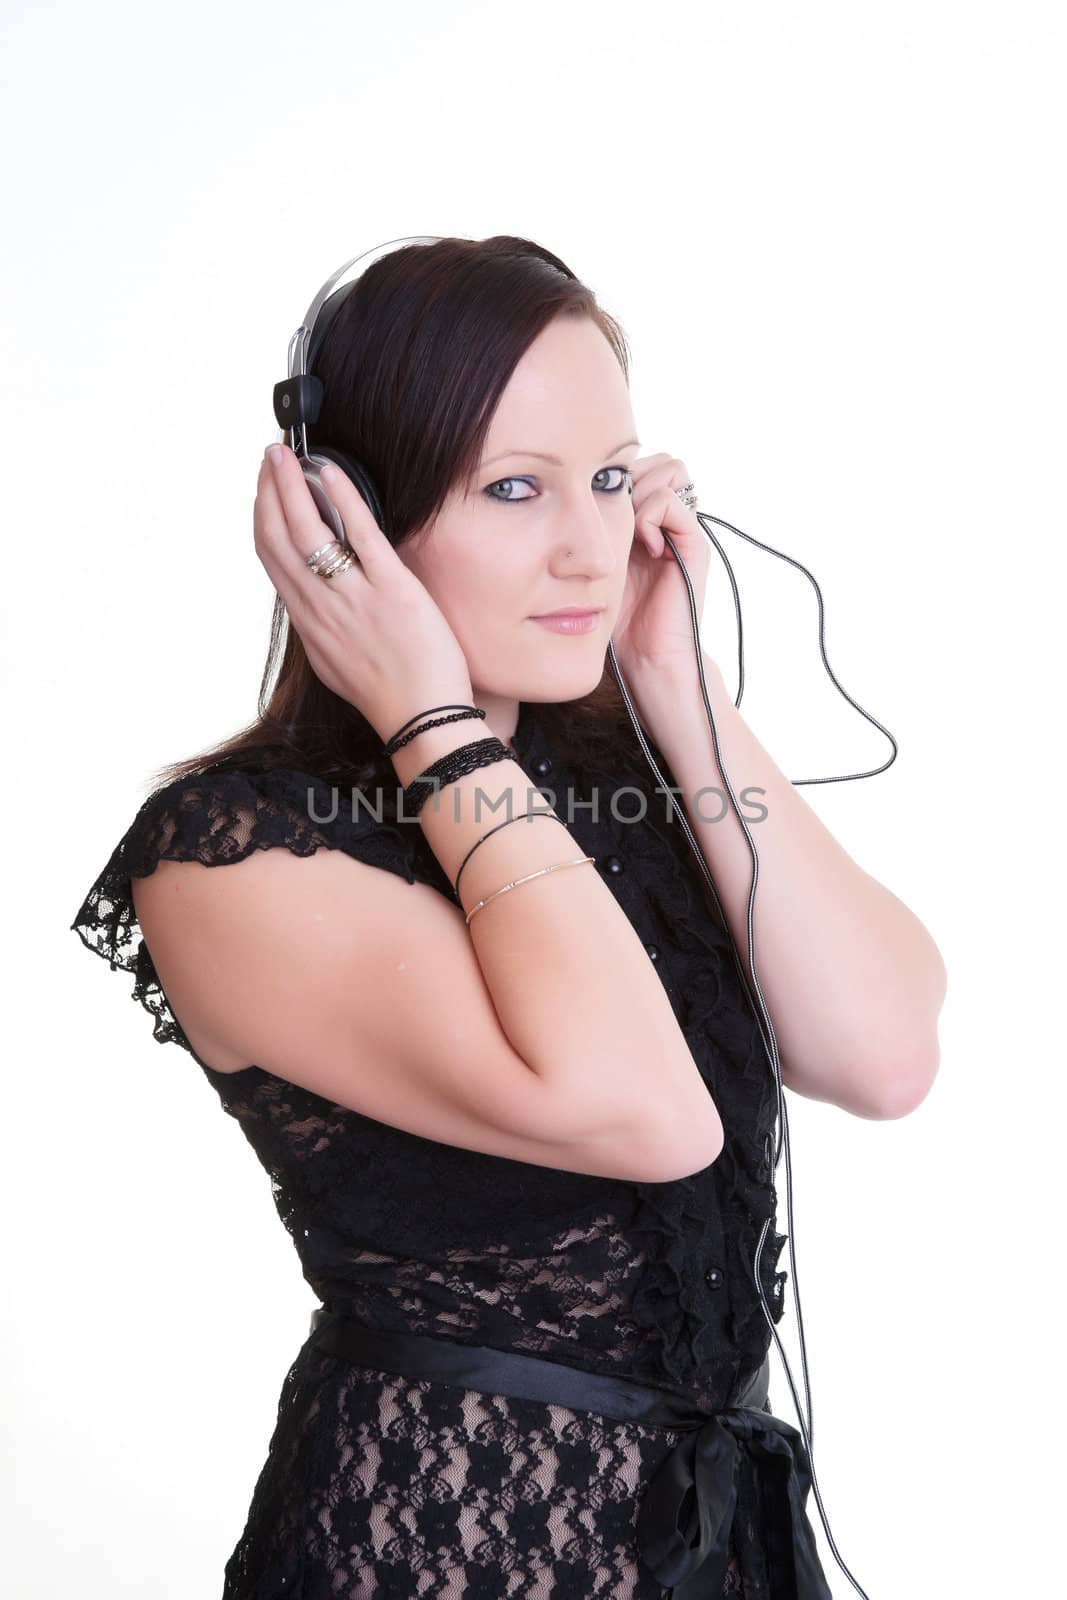 pretty young woman listening to headphones isolated on white